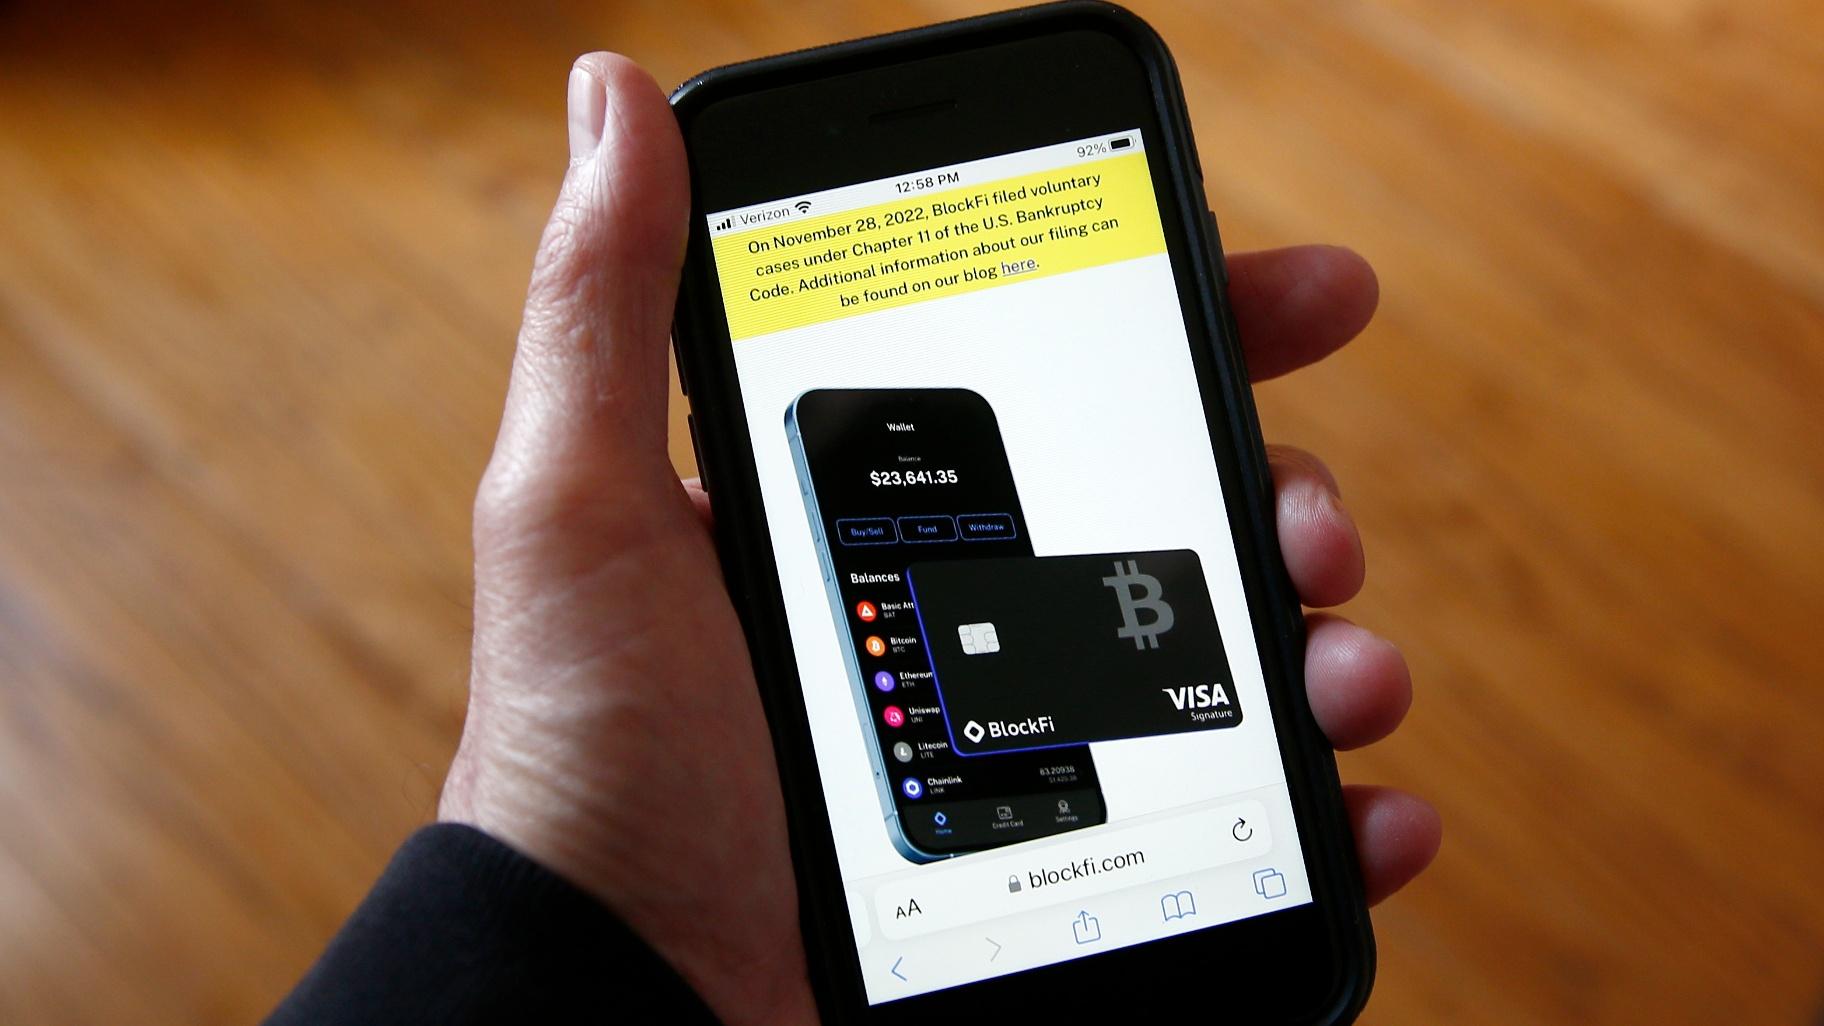 Text, in yellow, announcing cryptocurrency lender BlockFi’s bankruptcy filing, appears on the company’s website on a smartphone, Nov. 28, 2022, in New York. (AP Photo / Peter Morgan, File)